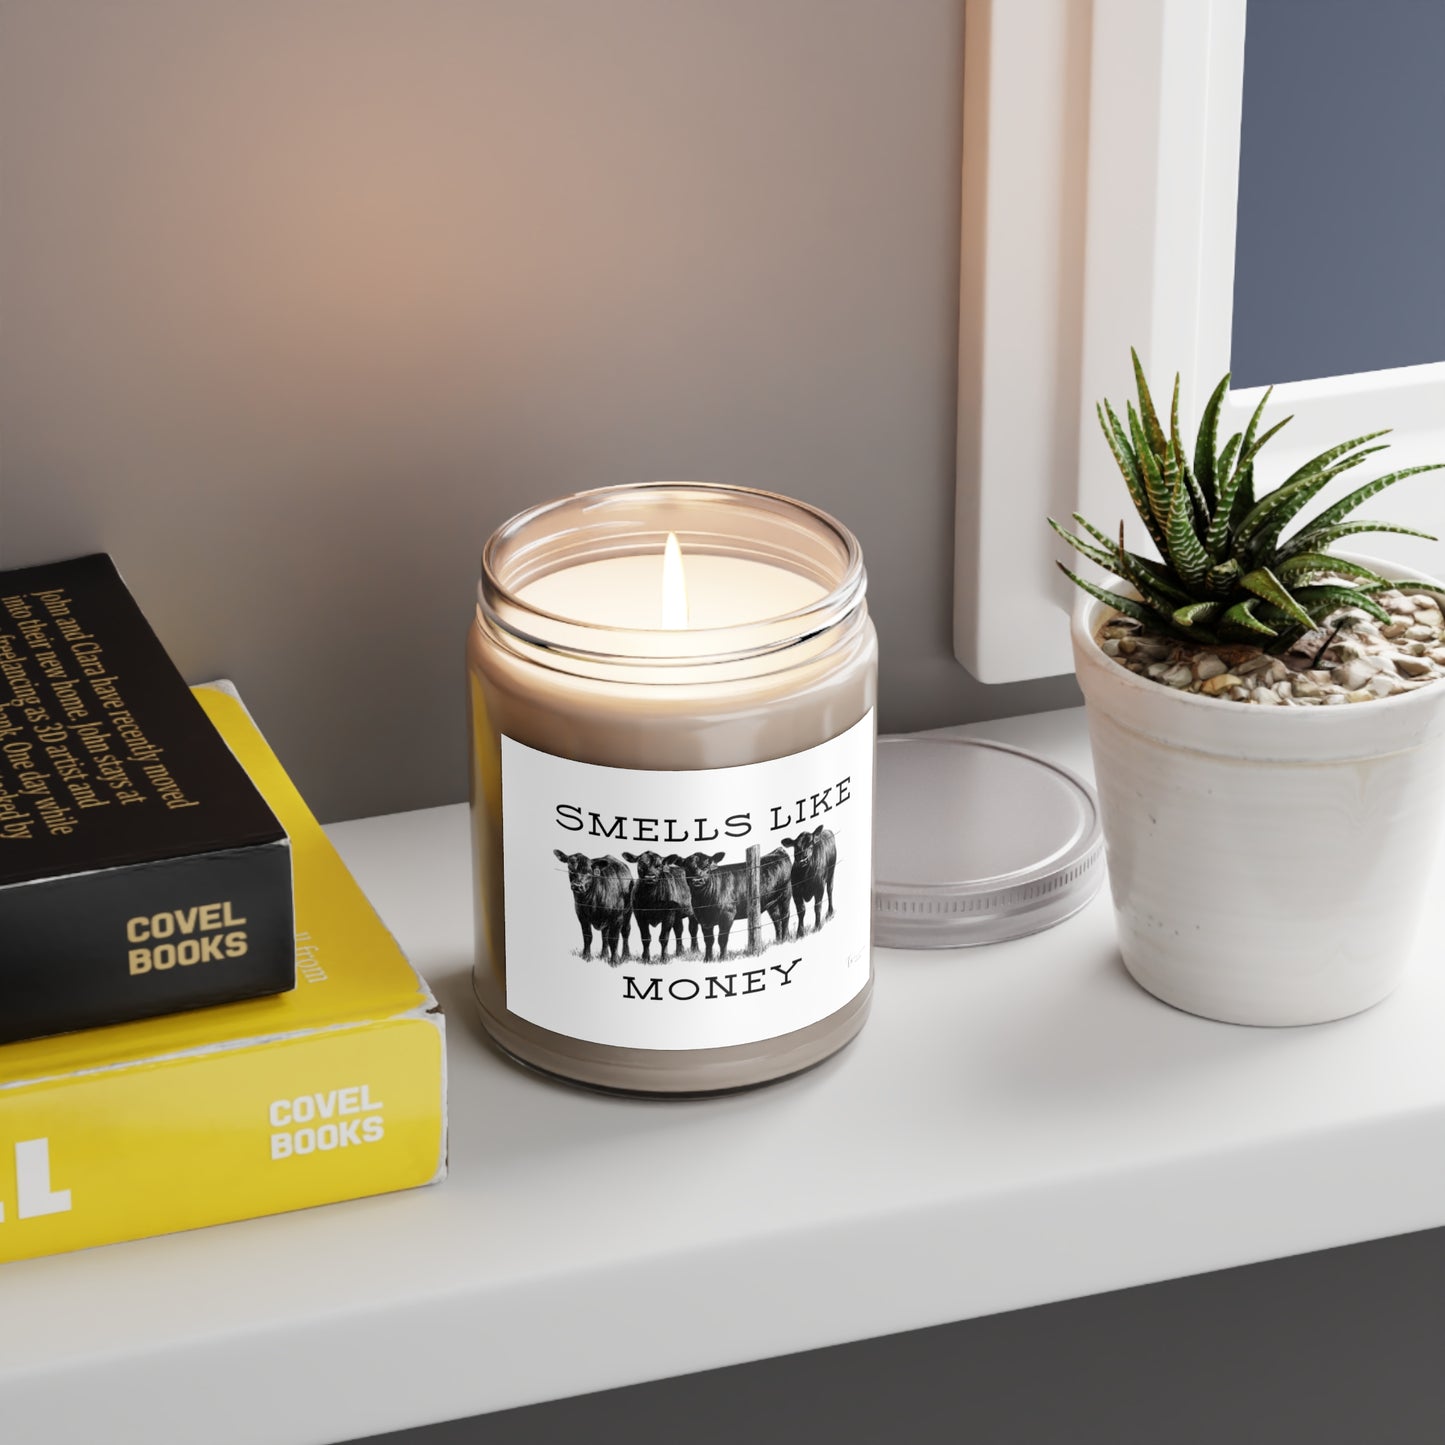 "Smells Like Money" Scented Candles, 9oz